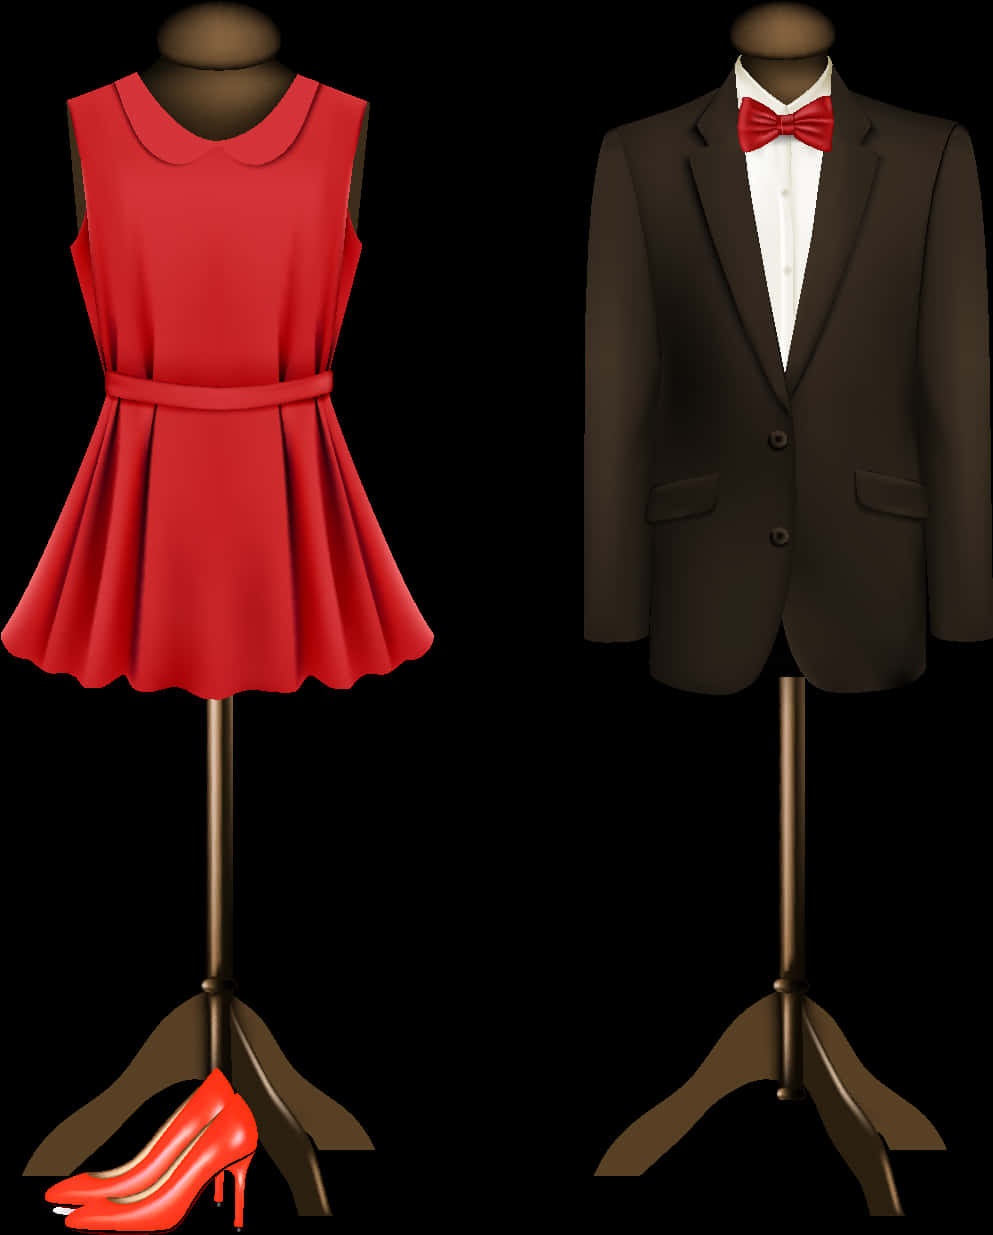 A Couple Of Mannequins With A Red Dress And A Suit